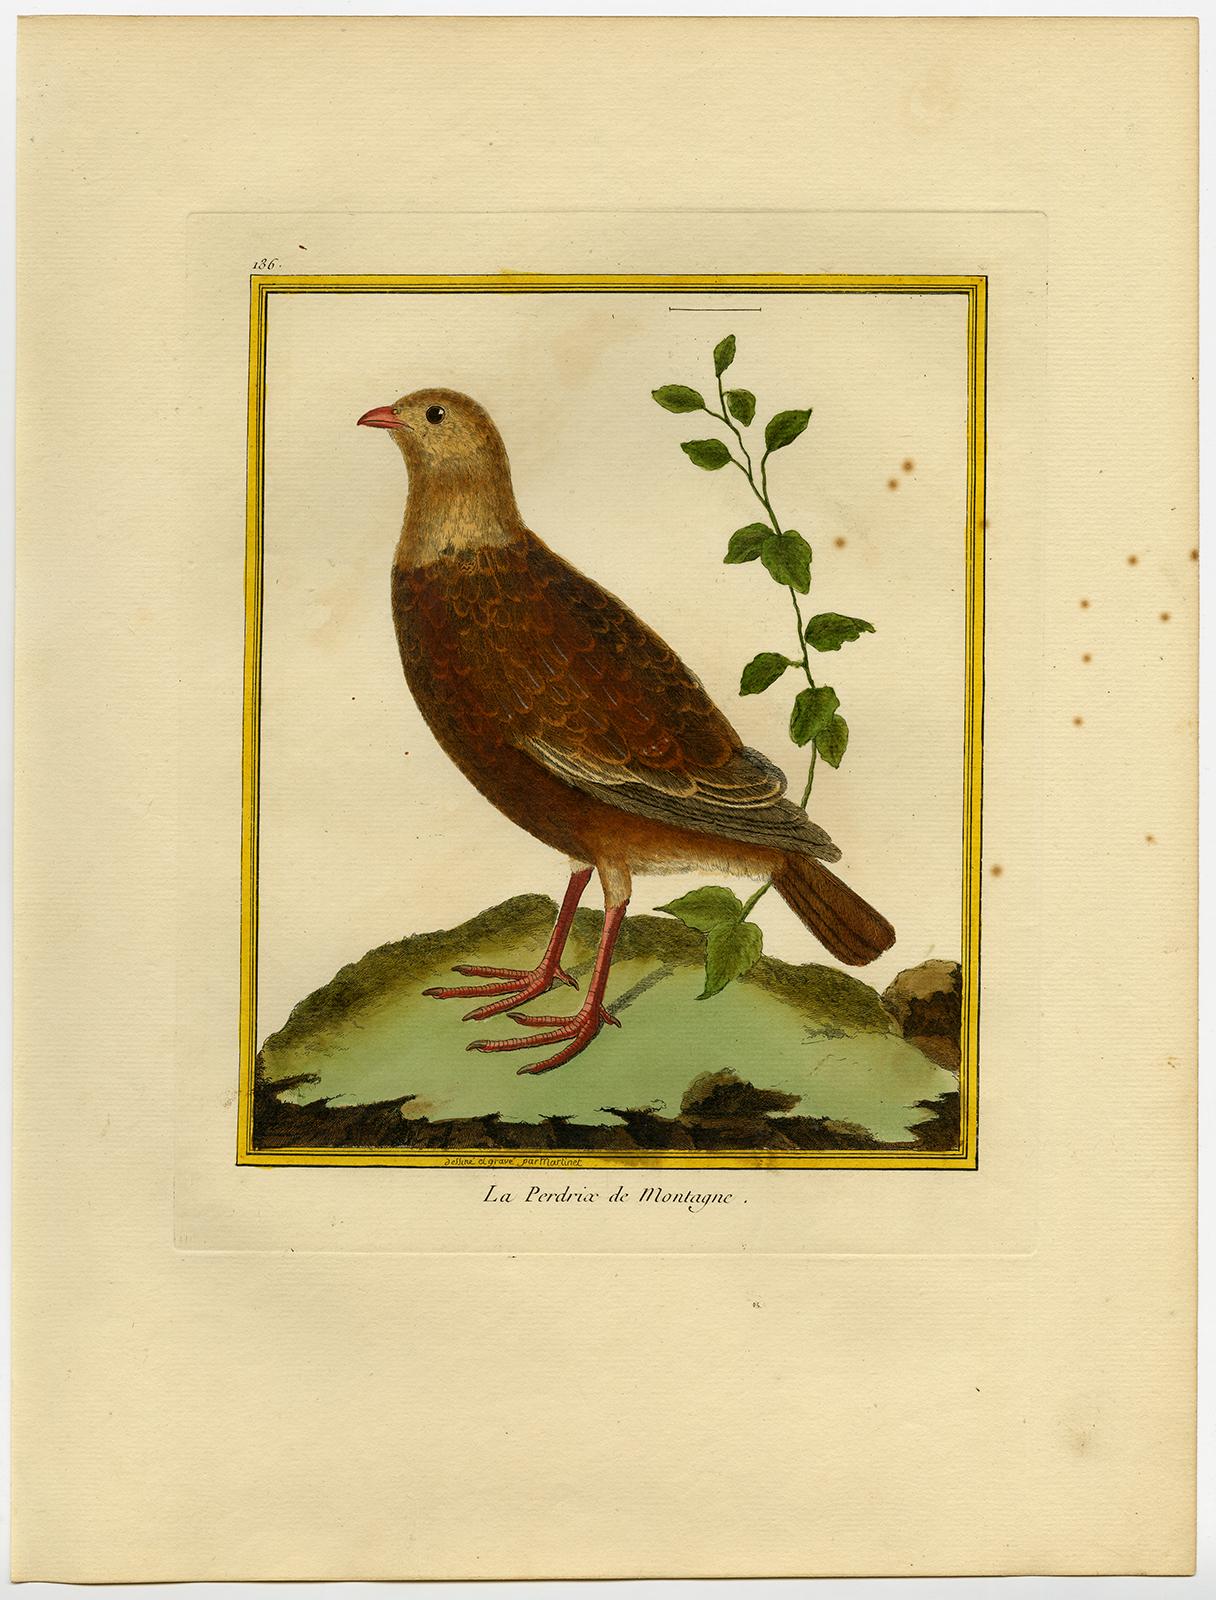 Mountain Partridge by Martinet - Handcoloured engraving - 18th century - Print by Francois Nicolas Martinet